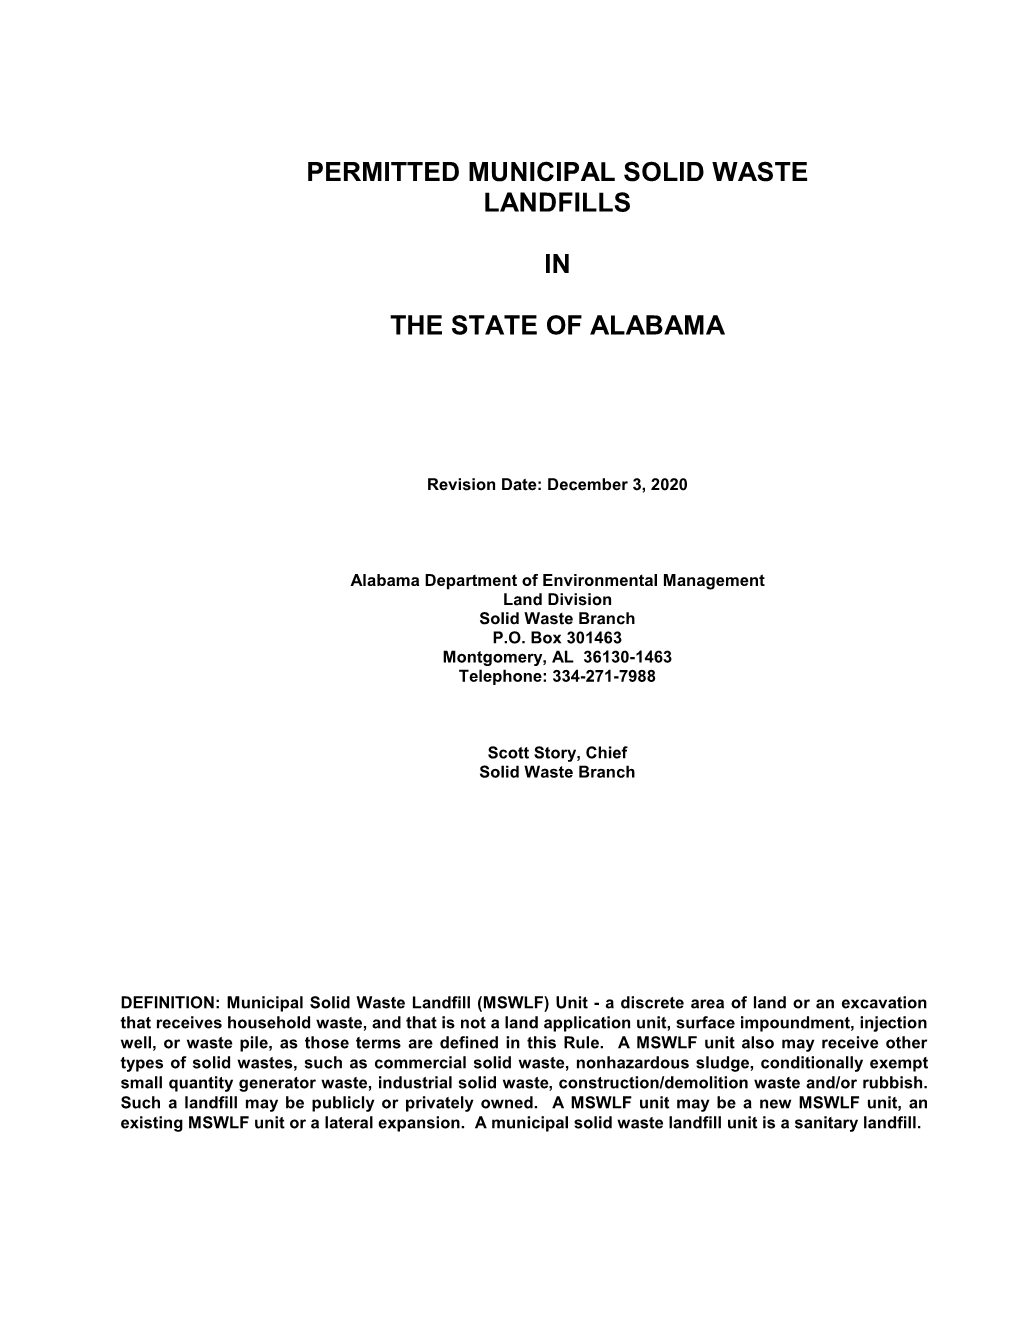 Permitted Municipal Solid Waste Landfills in the State of Alabama